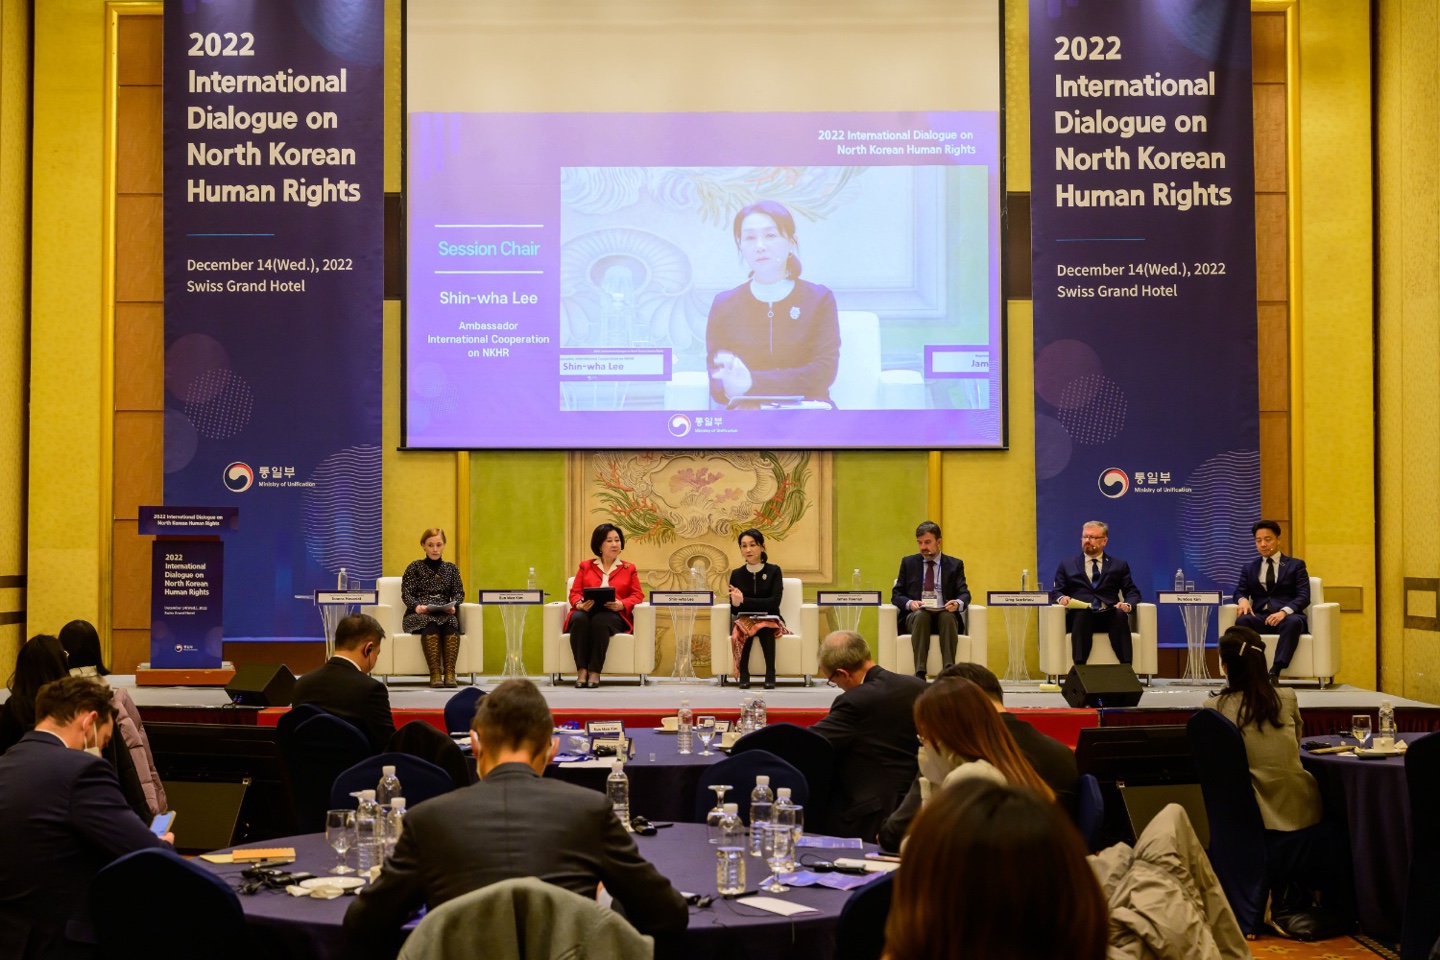 「2022 International Dialogue on Human Rights in North Korea」